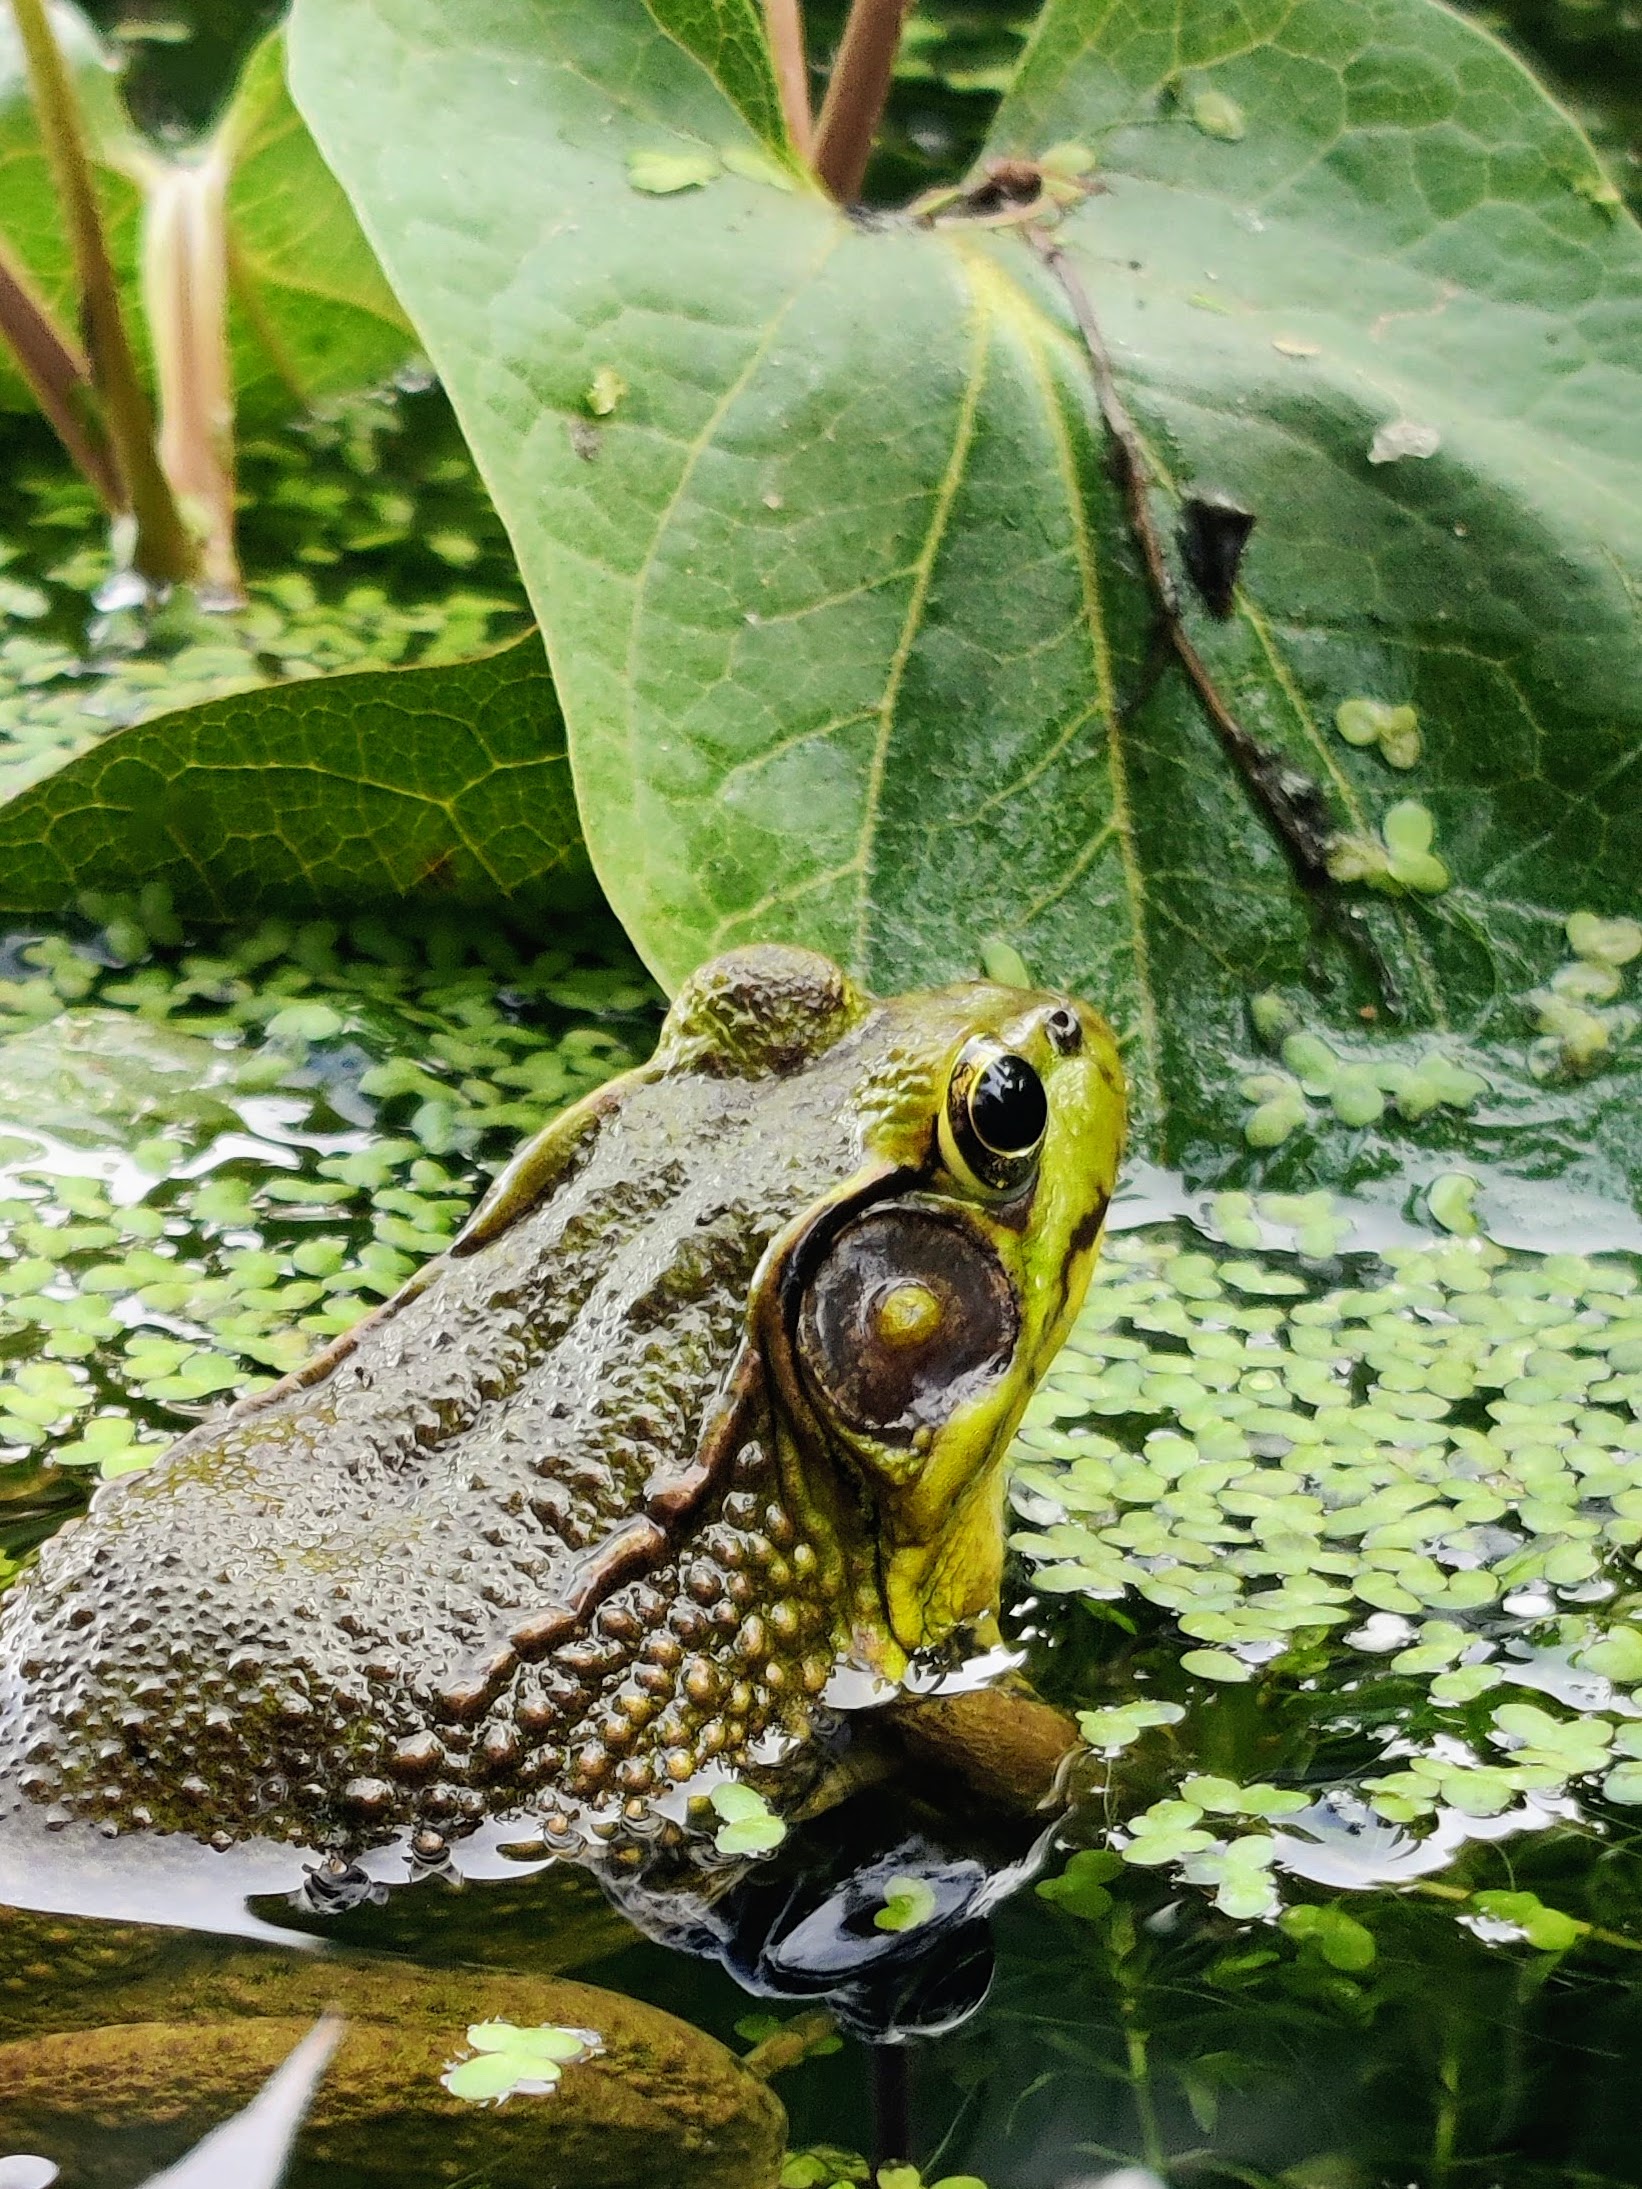 A brown and green frog sticks its head out of pond water, green water plants in the background.